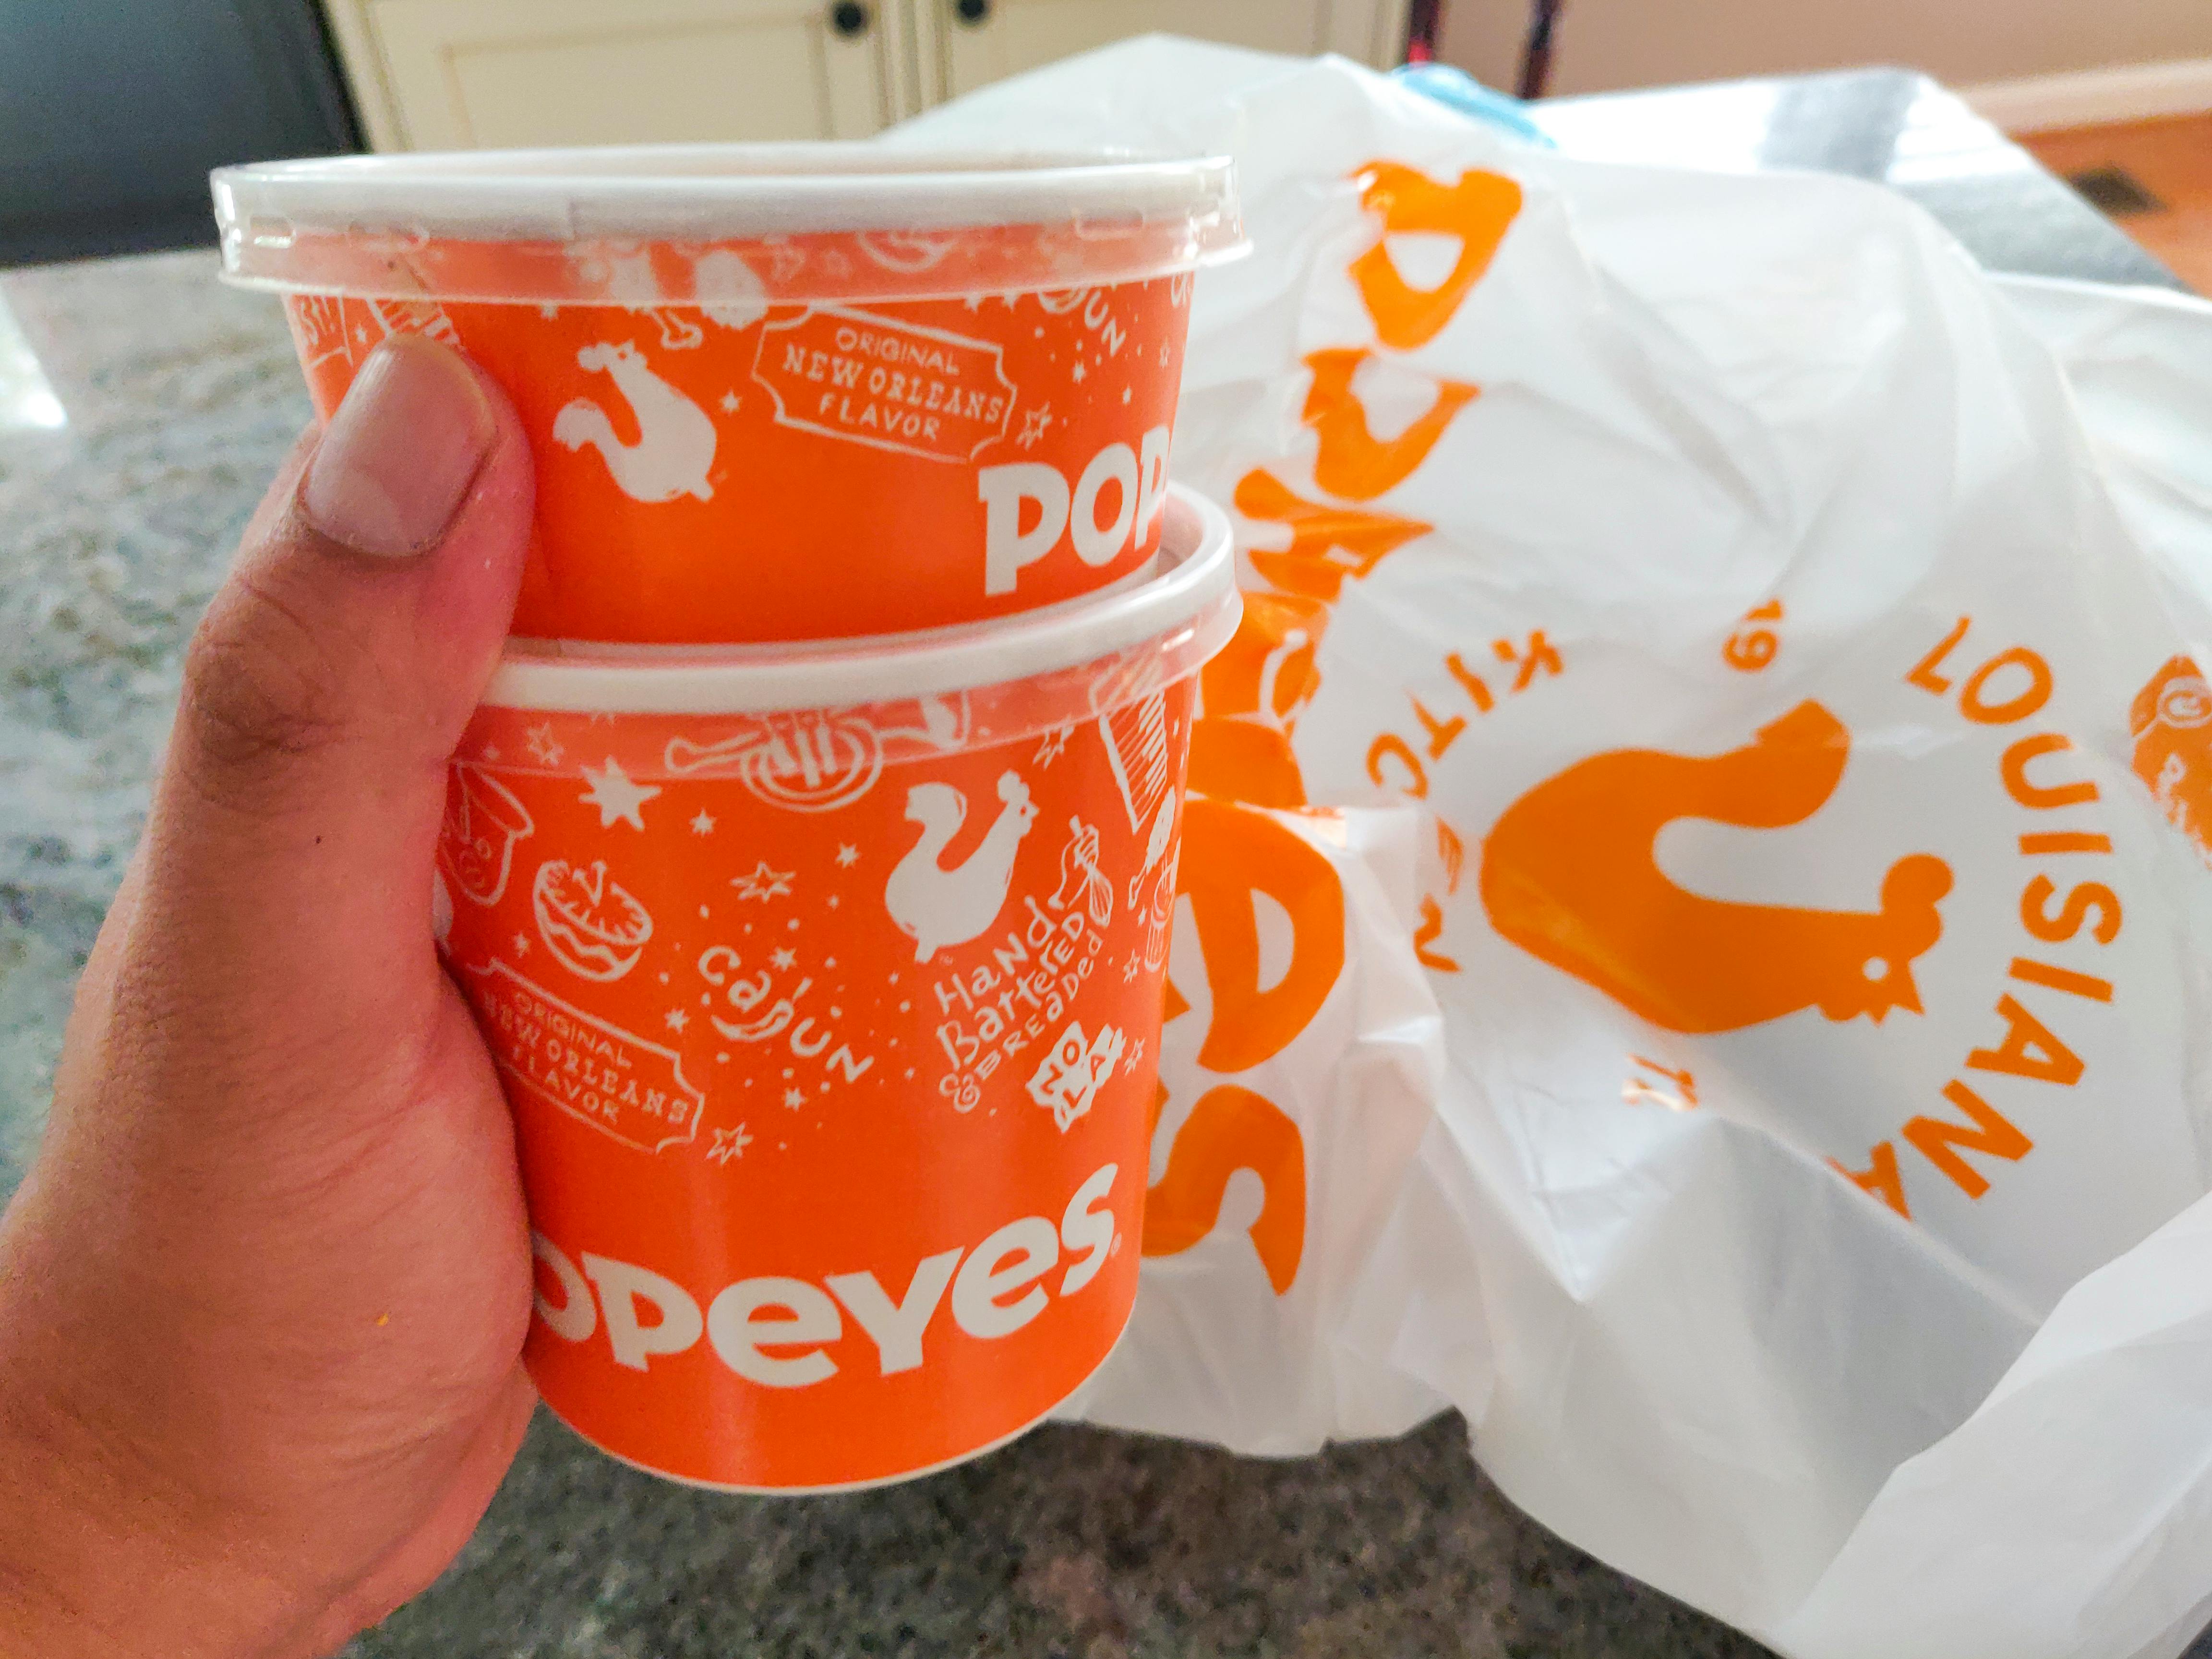 A person's hand holding two containers of Popeyes side dishes next to a Popeyes takeout bag on a counter.